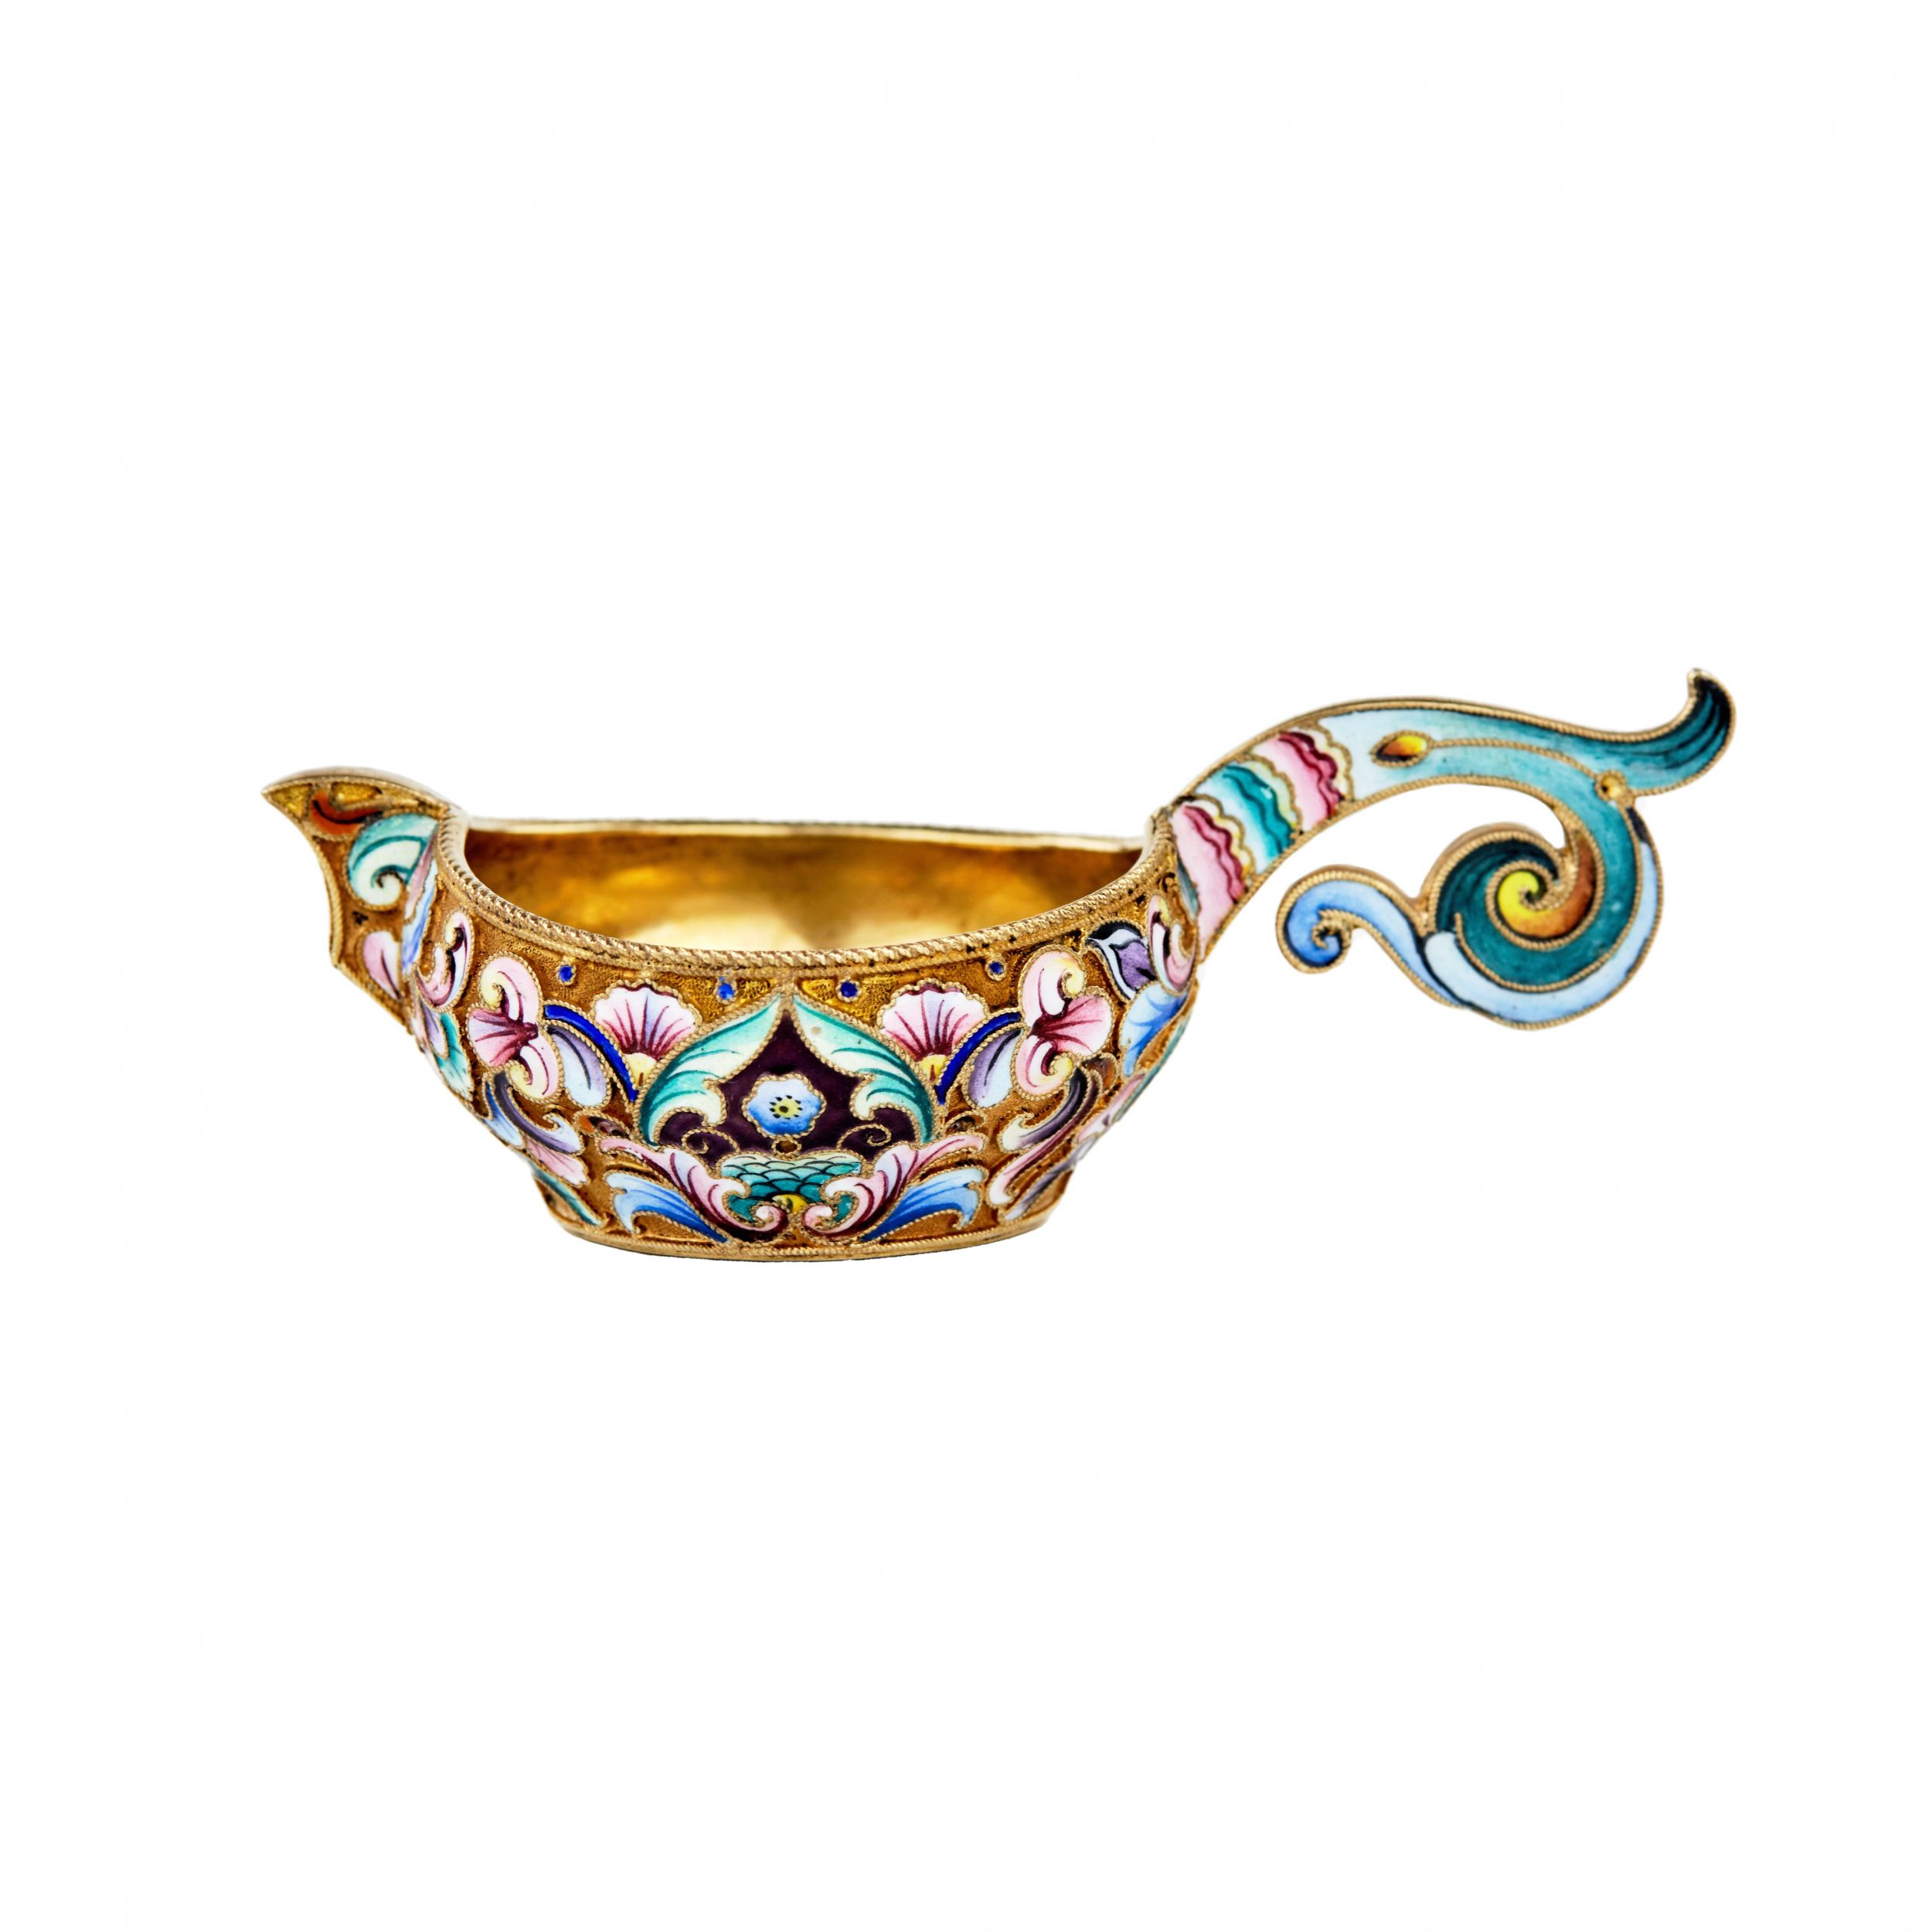 Silver-Kovsh-with-painted-enamels-Moscow-20th-artel-1908–1917-